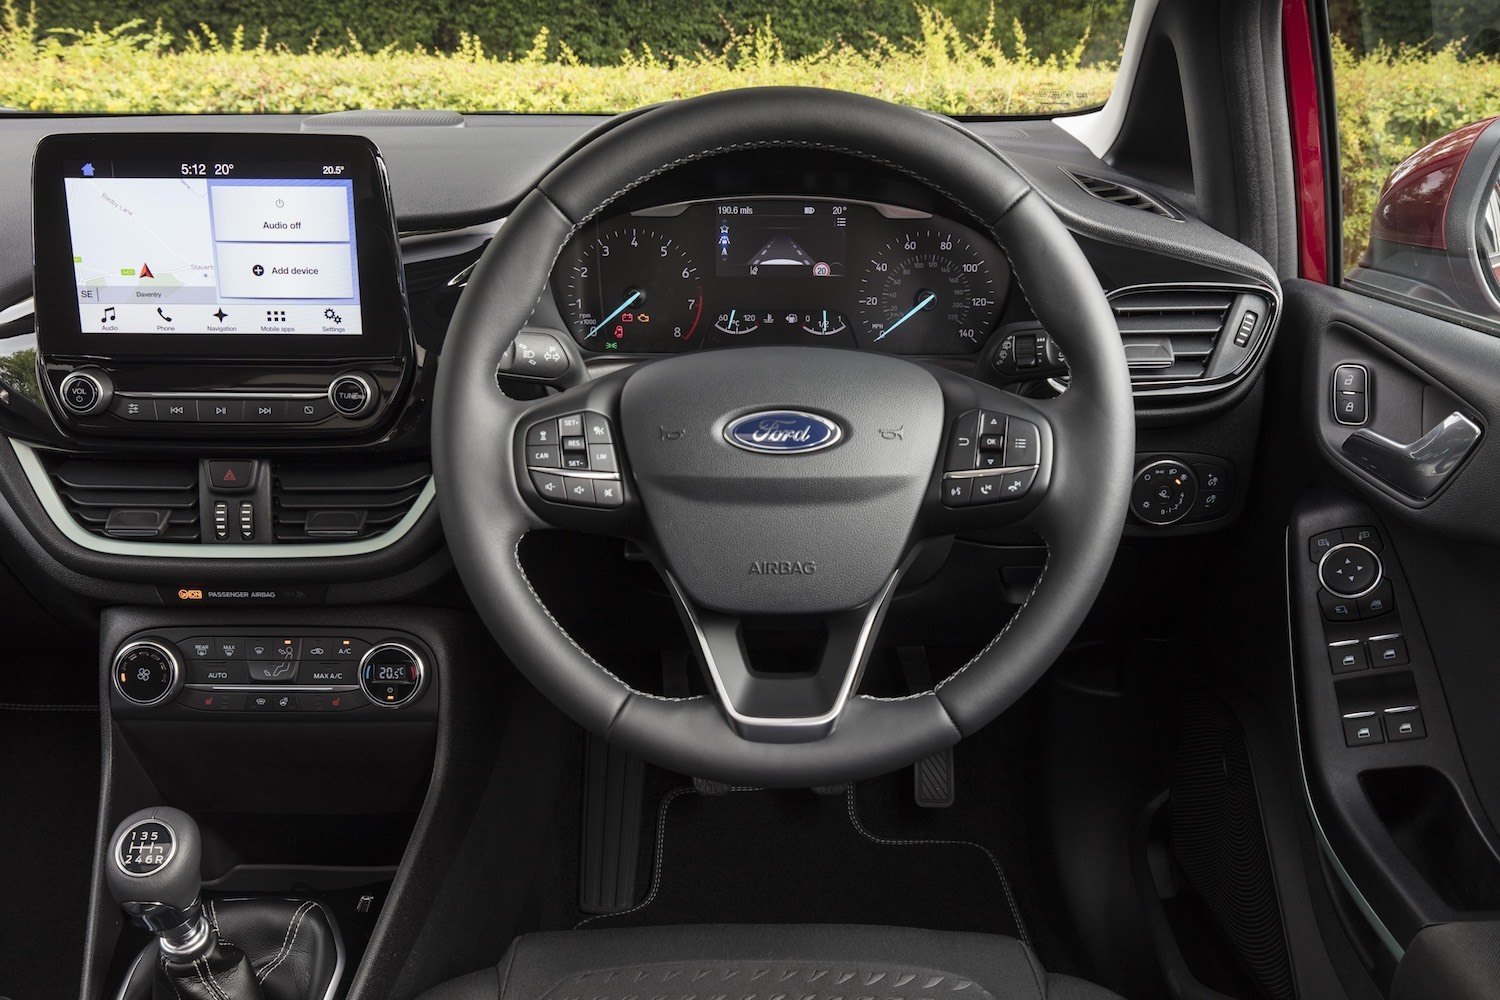 Tom Scanlan reviews the All New Ford Fiesta for Drive 7